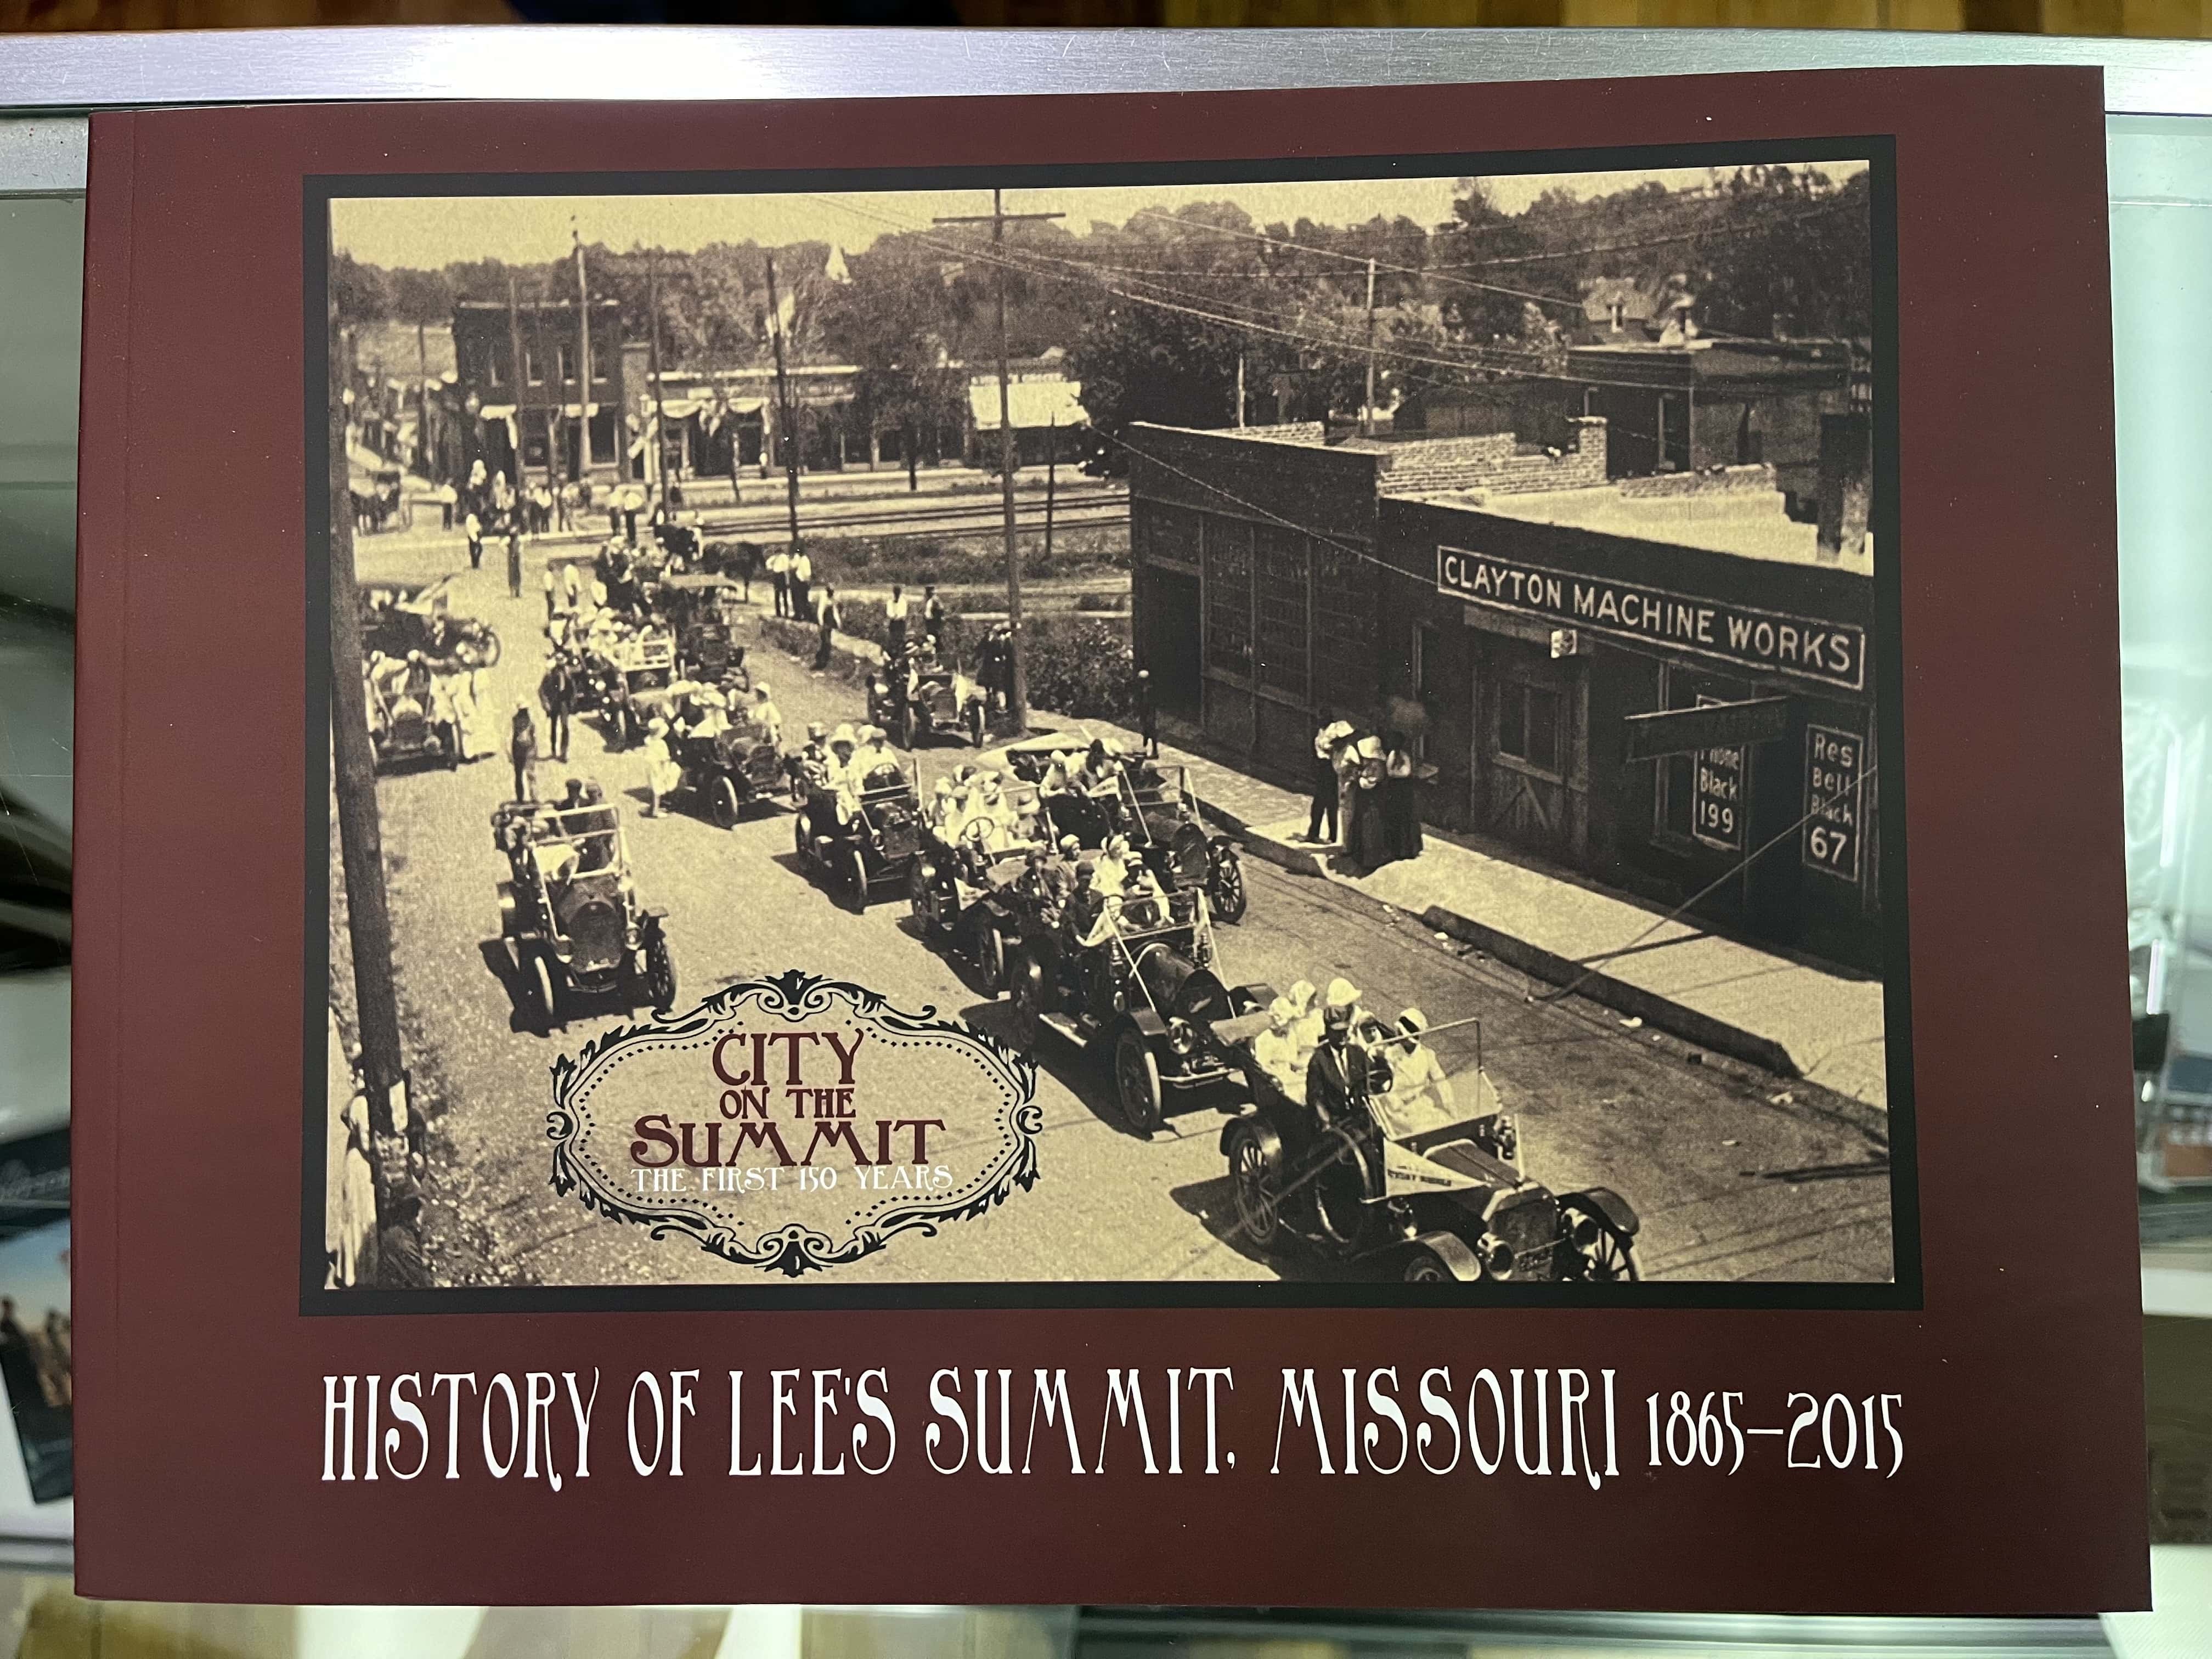 book about the history of Lee's Summit, MO